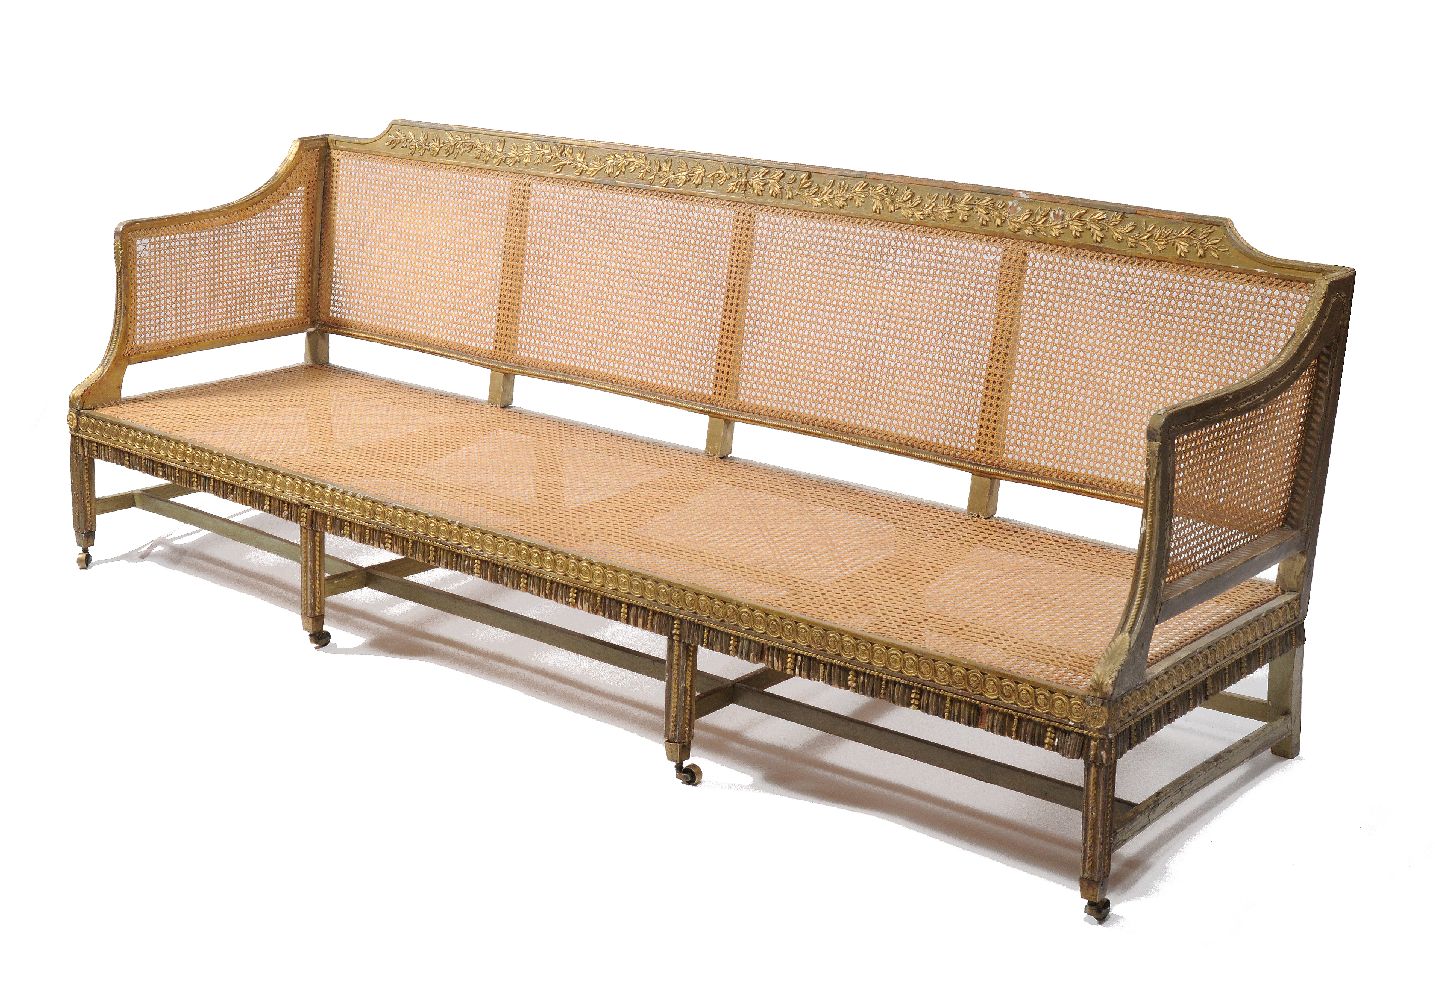 A George III gilt and green painted carved wood sofa